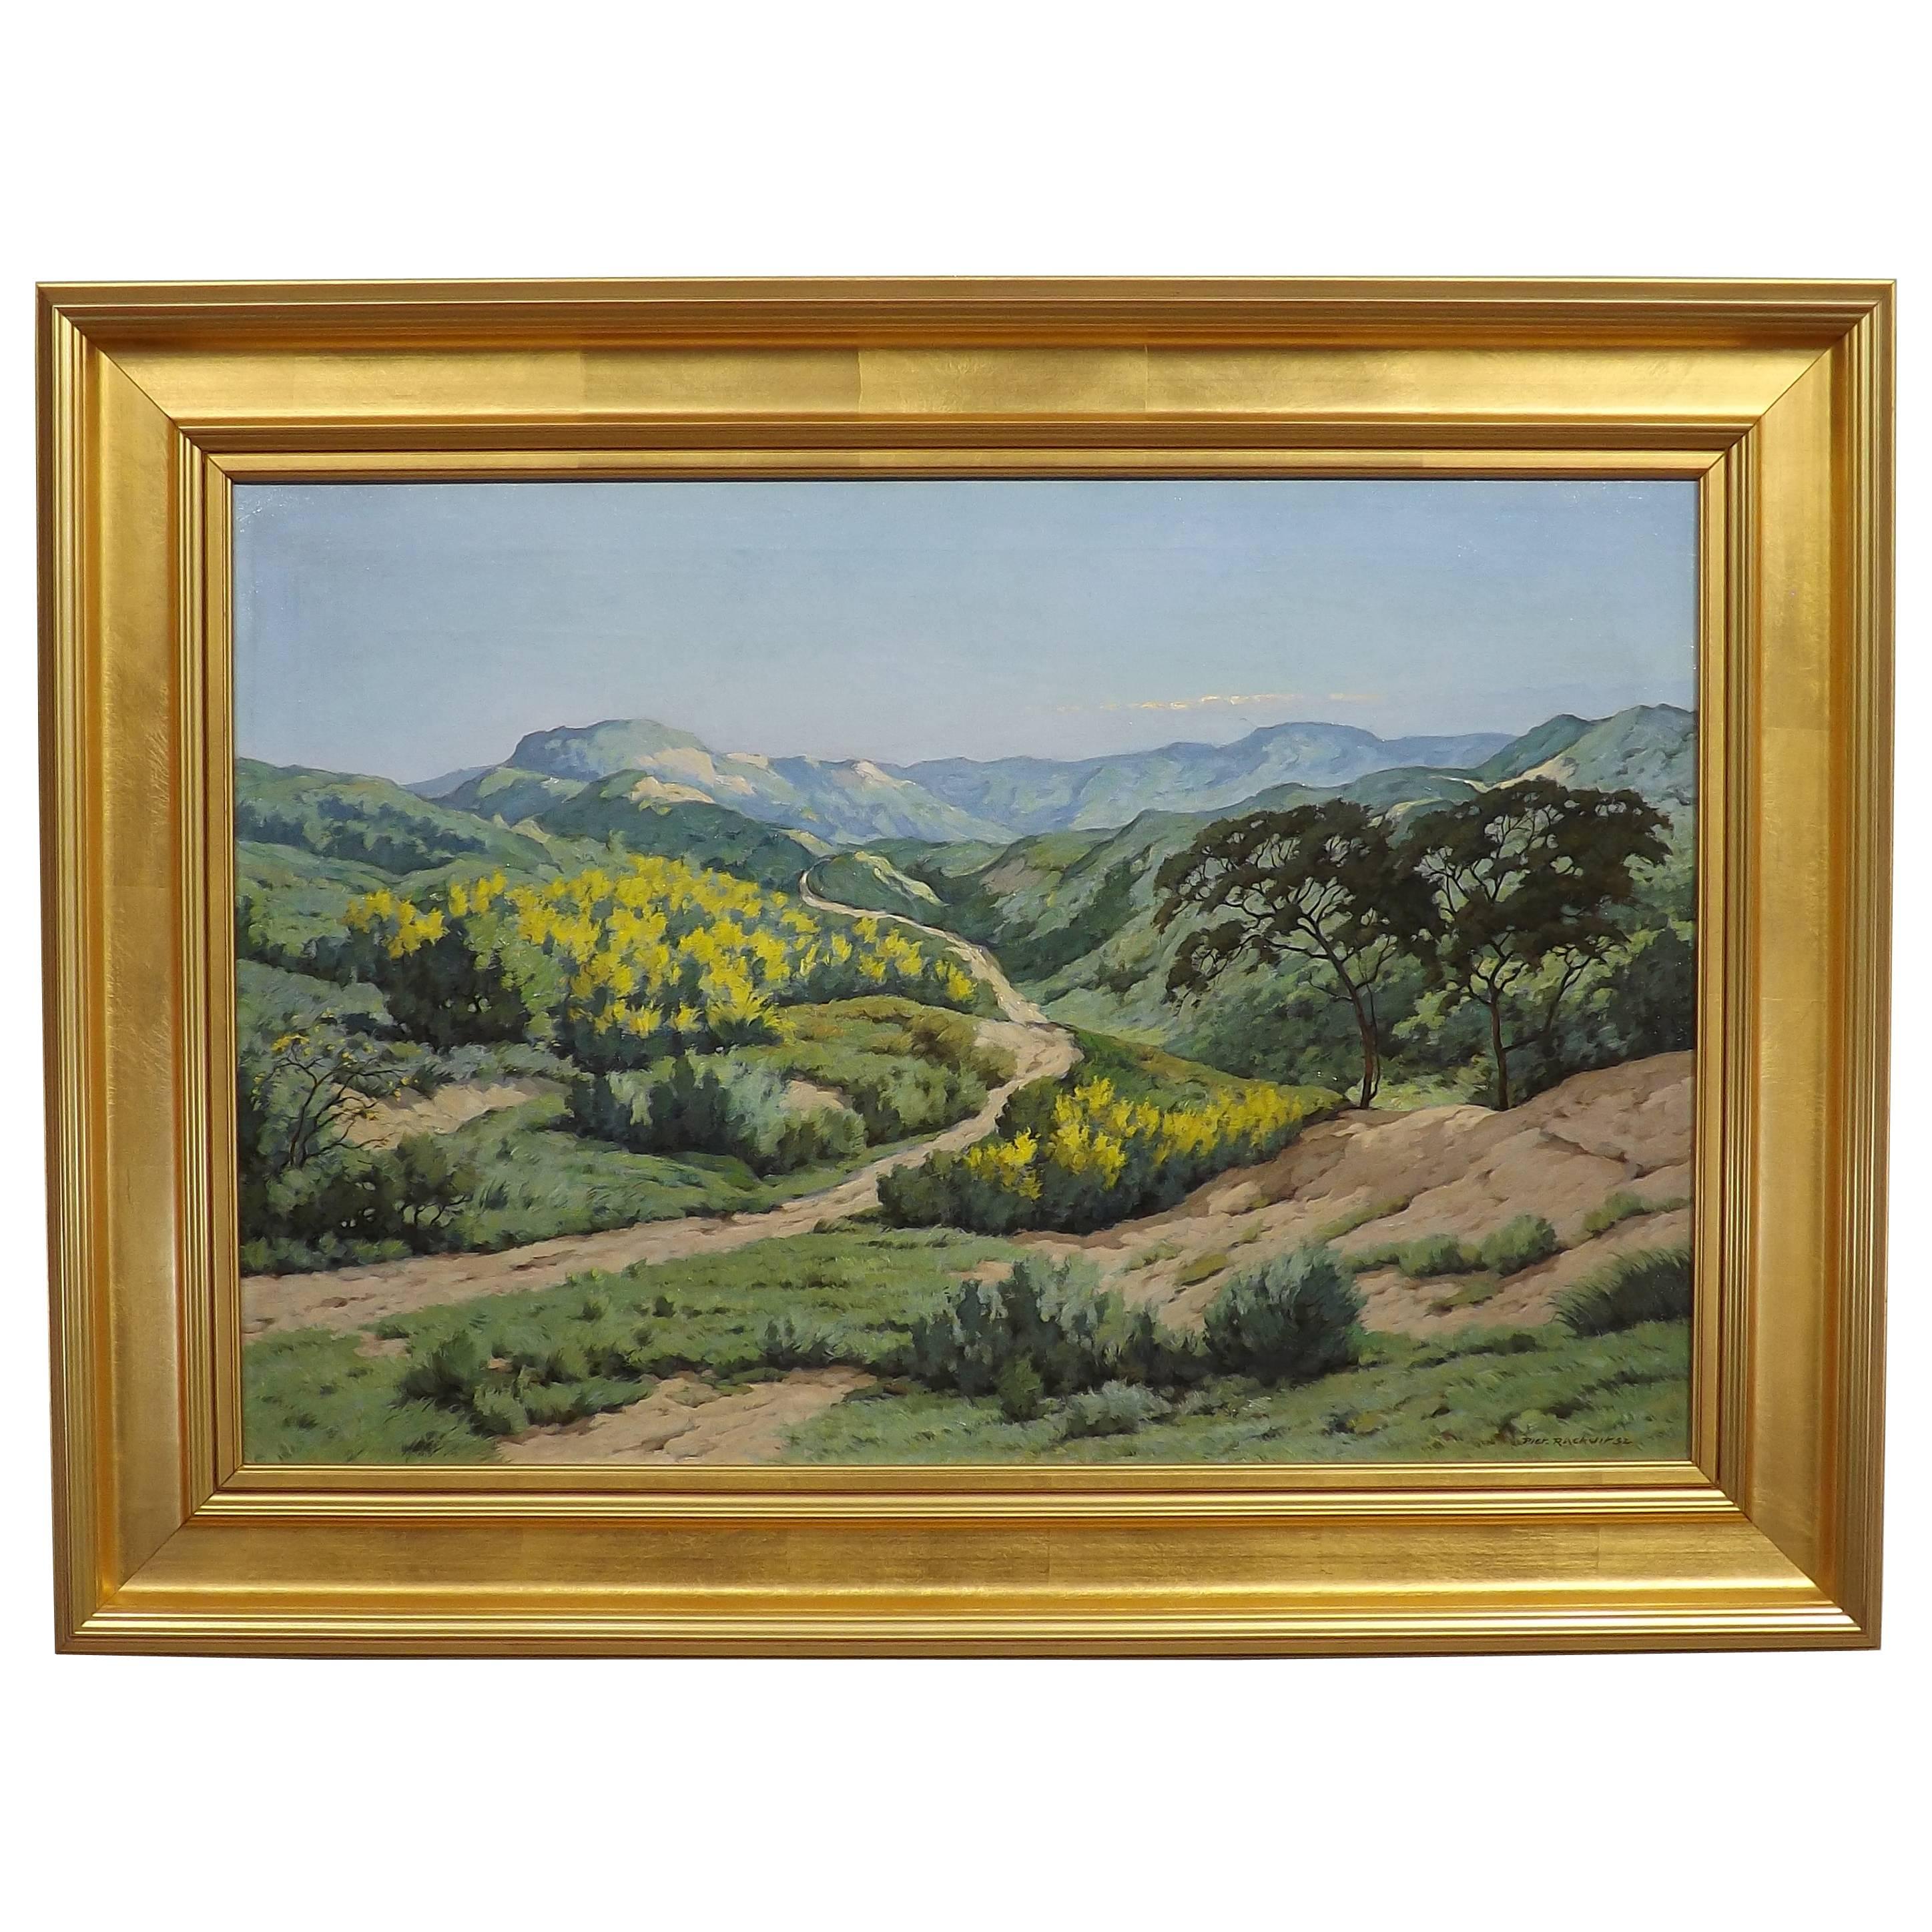 'California Wildflowers' Oil Painting by Piet Rackwitsz, 1930s For Sale